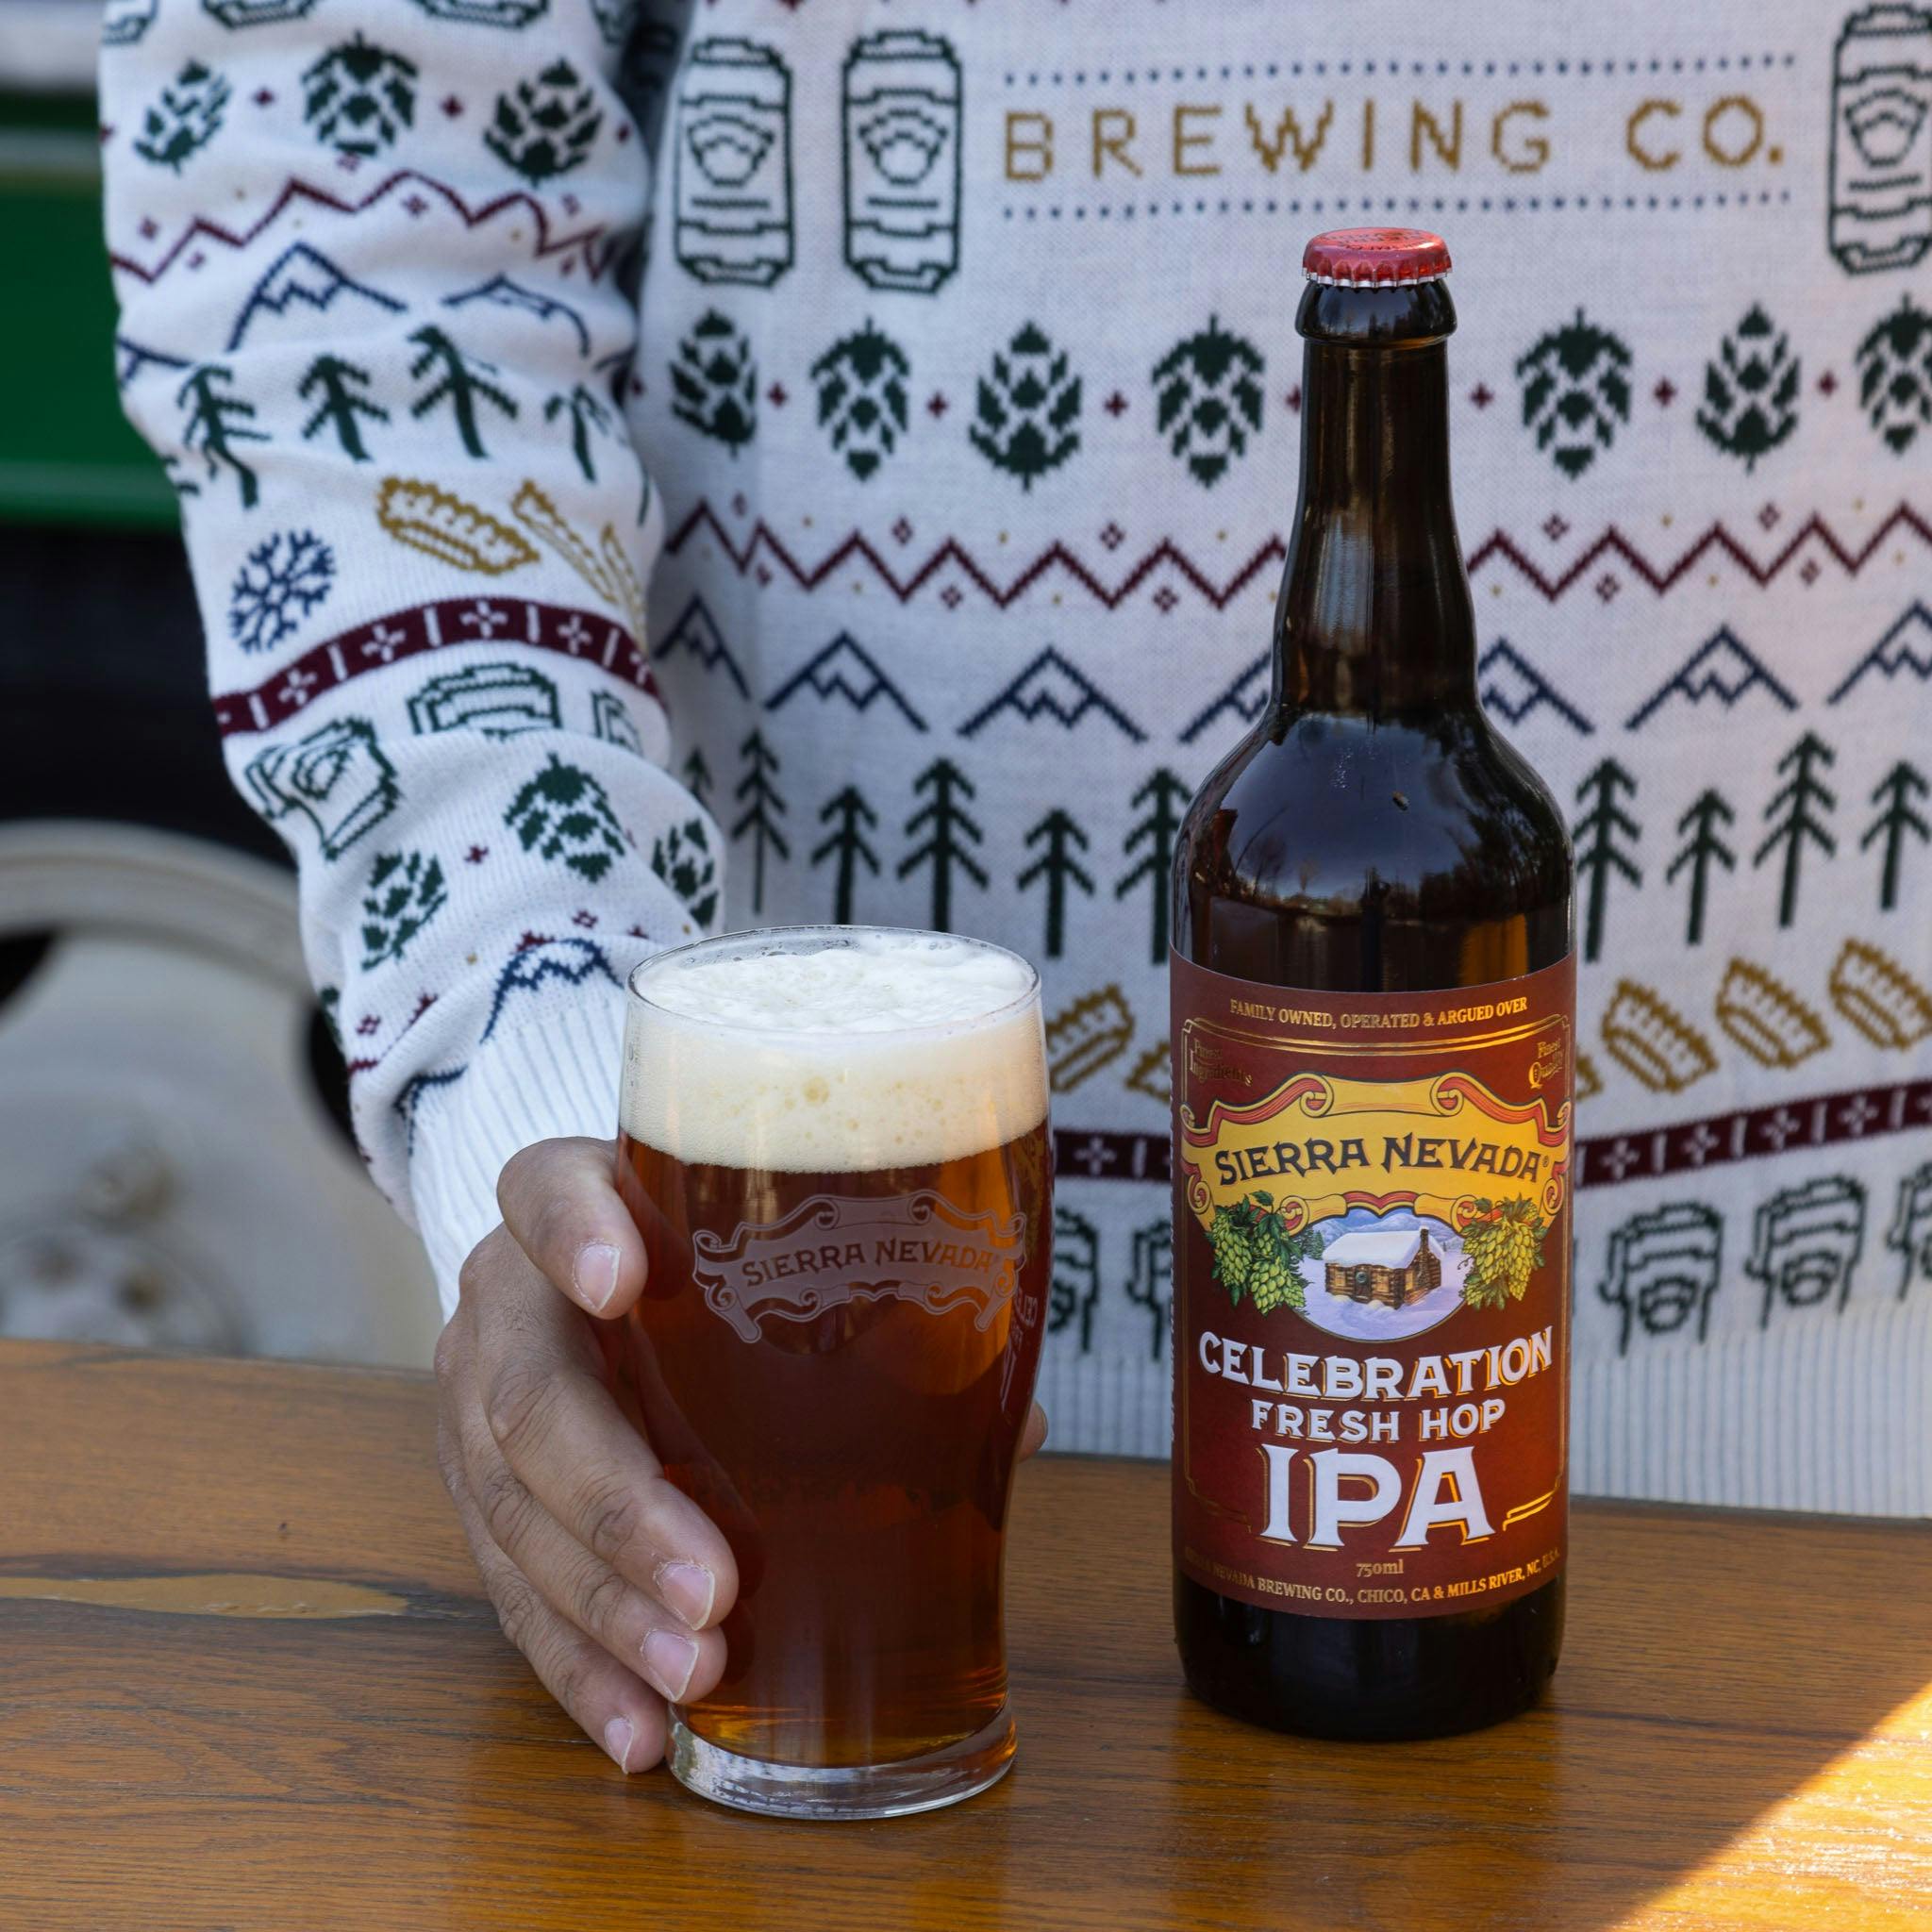 Sierra Nevada Brewing Co. Celebration IPA poured into a pint glass